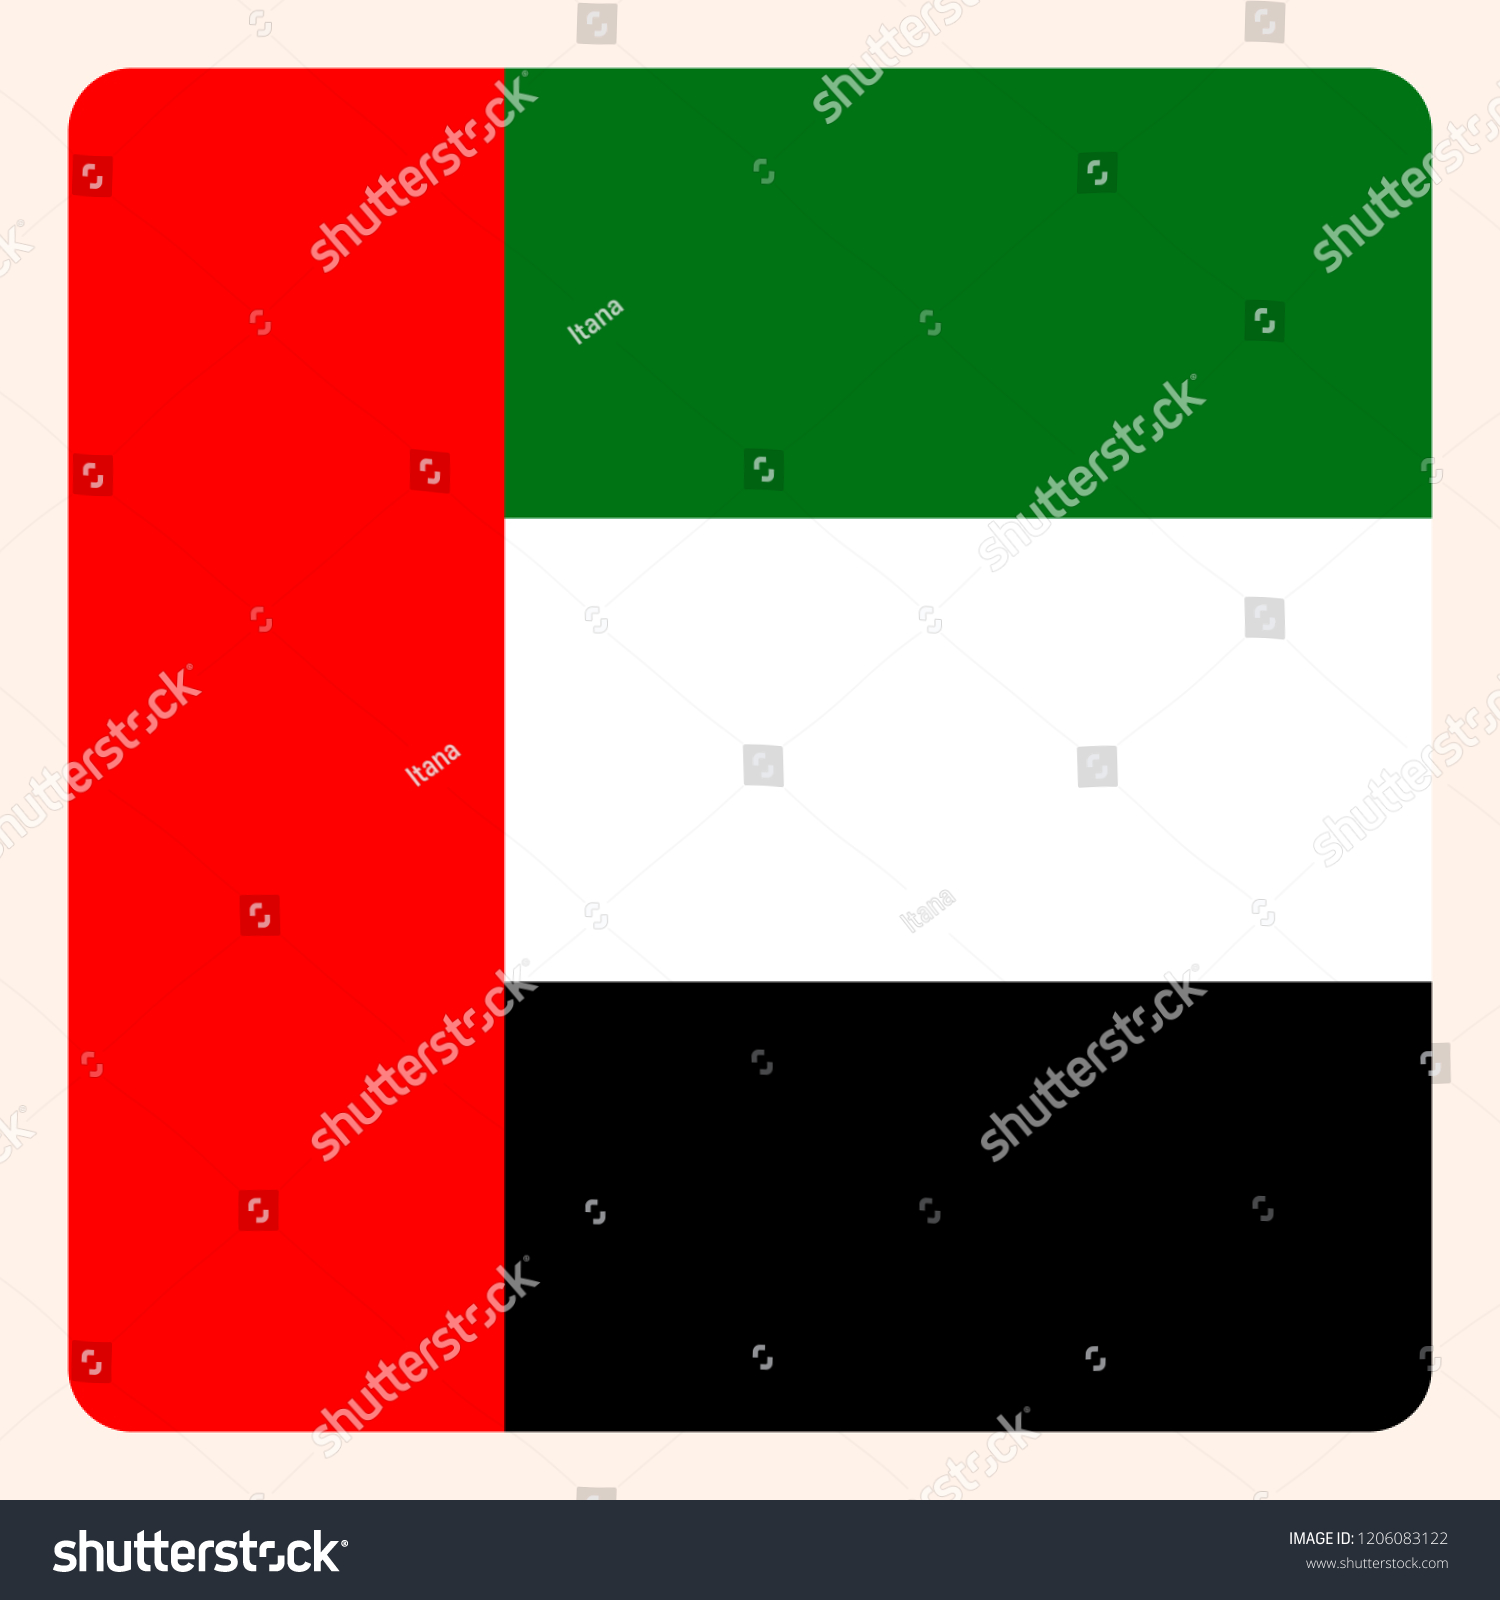 United Arab Emirates square flag button, social media communication sign, business icon. #1206083122